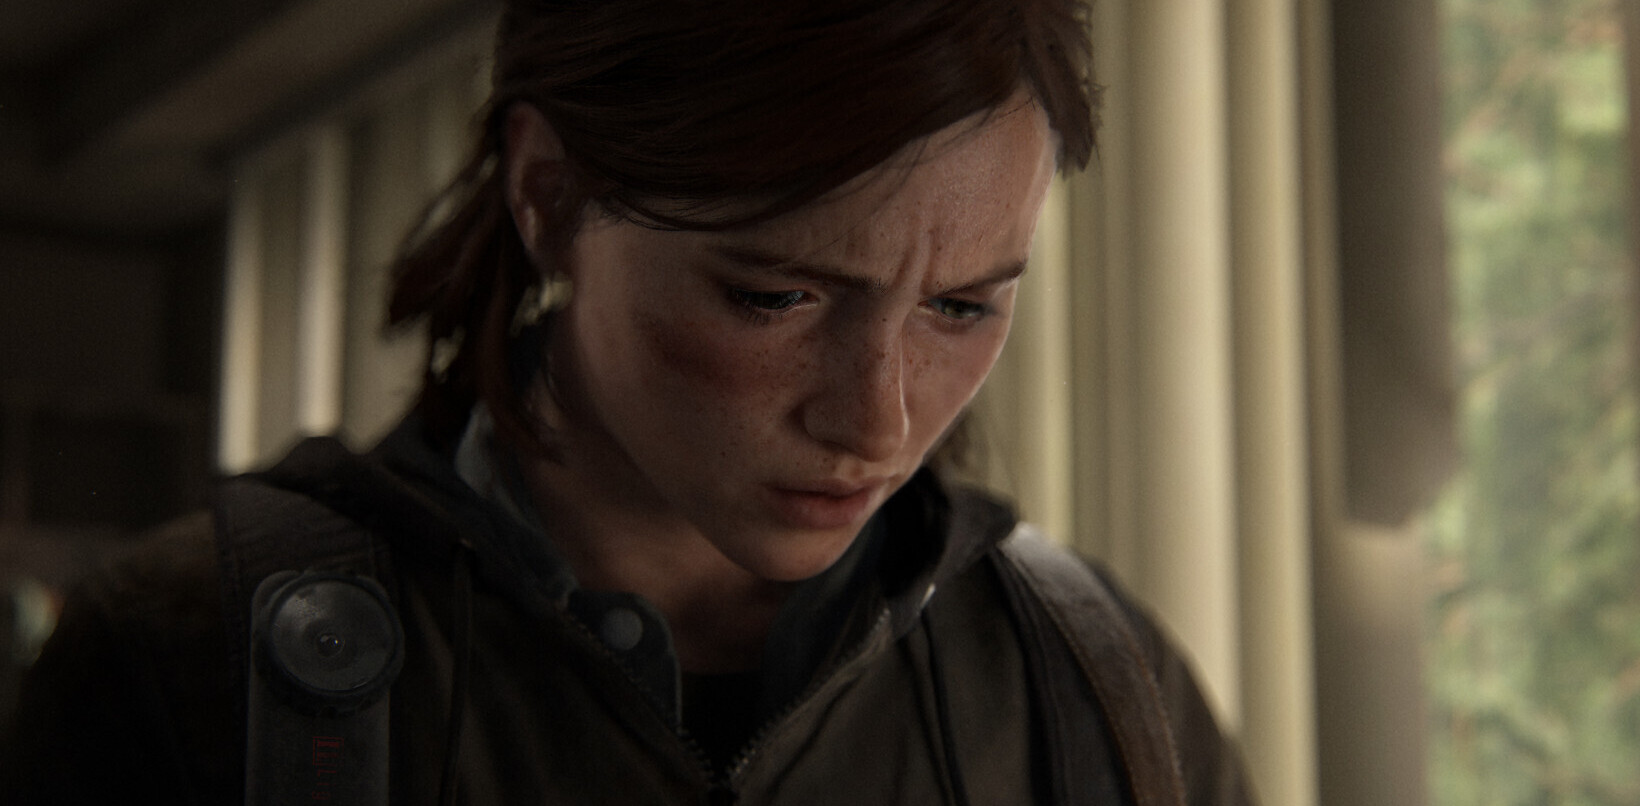 The Last of Us Part 2 is a phenomenal send-off for this console generation